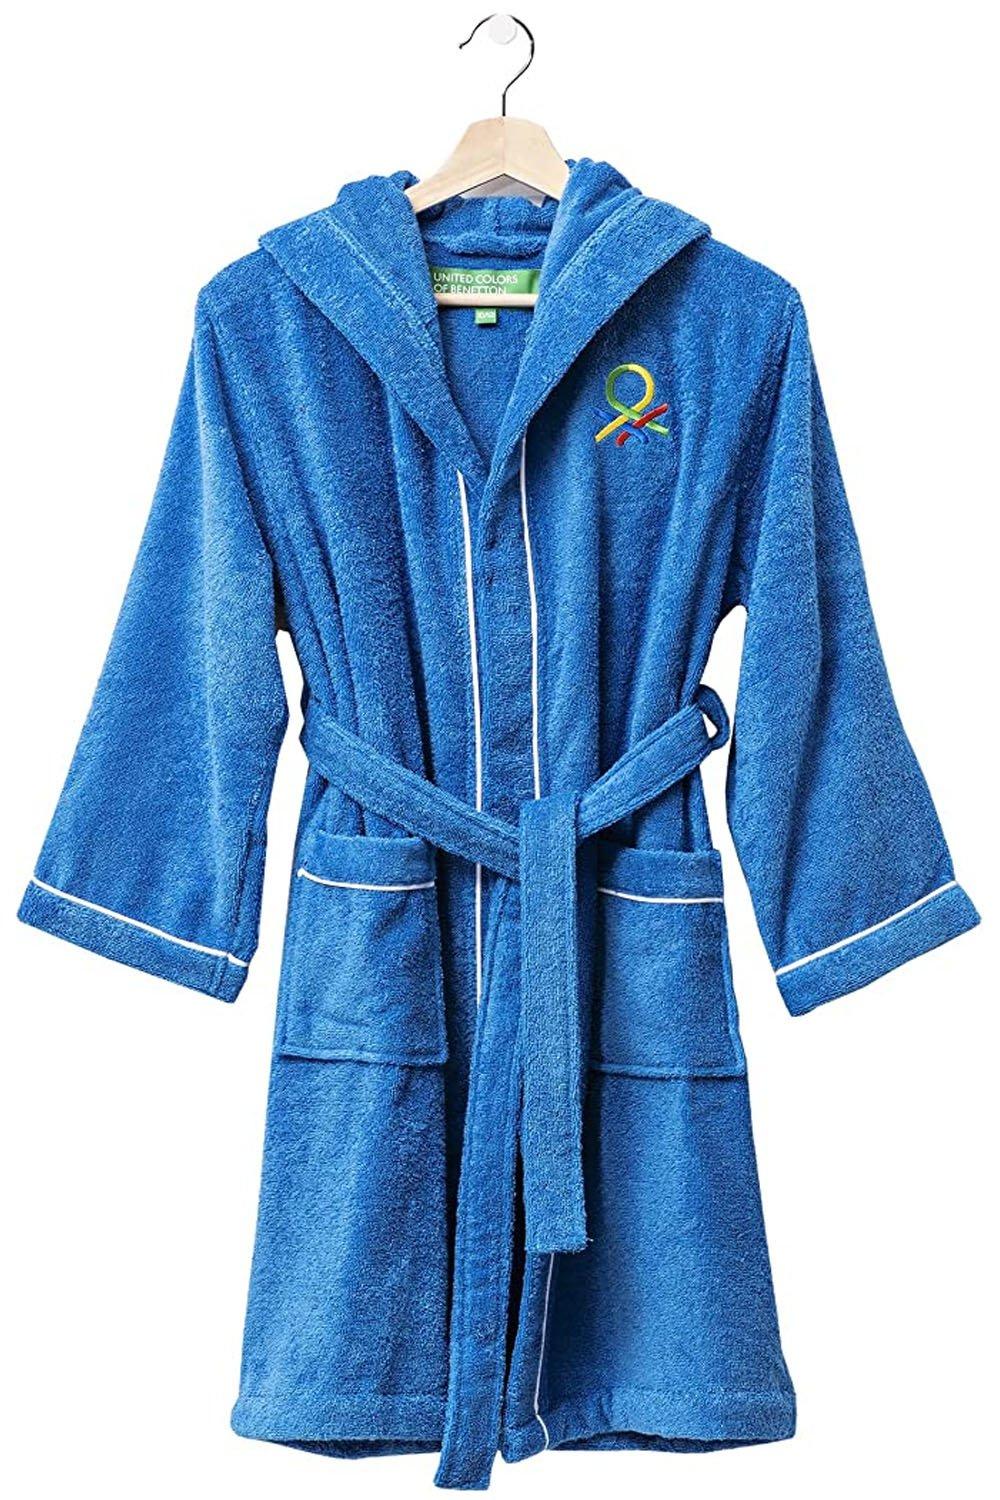 United Colors 100% Cotton Kids Bathrobe with Hoodie 7-9 Years Old Blue